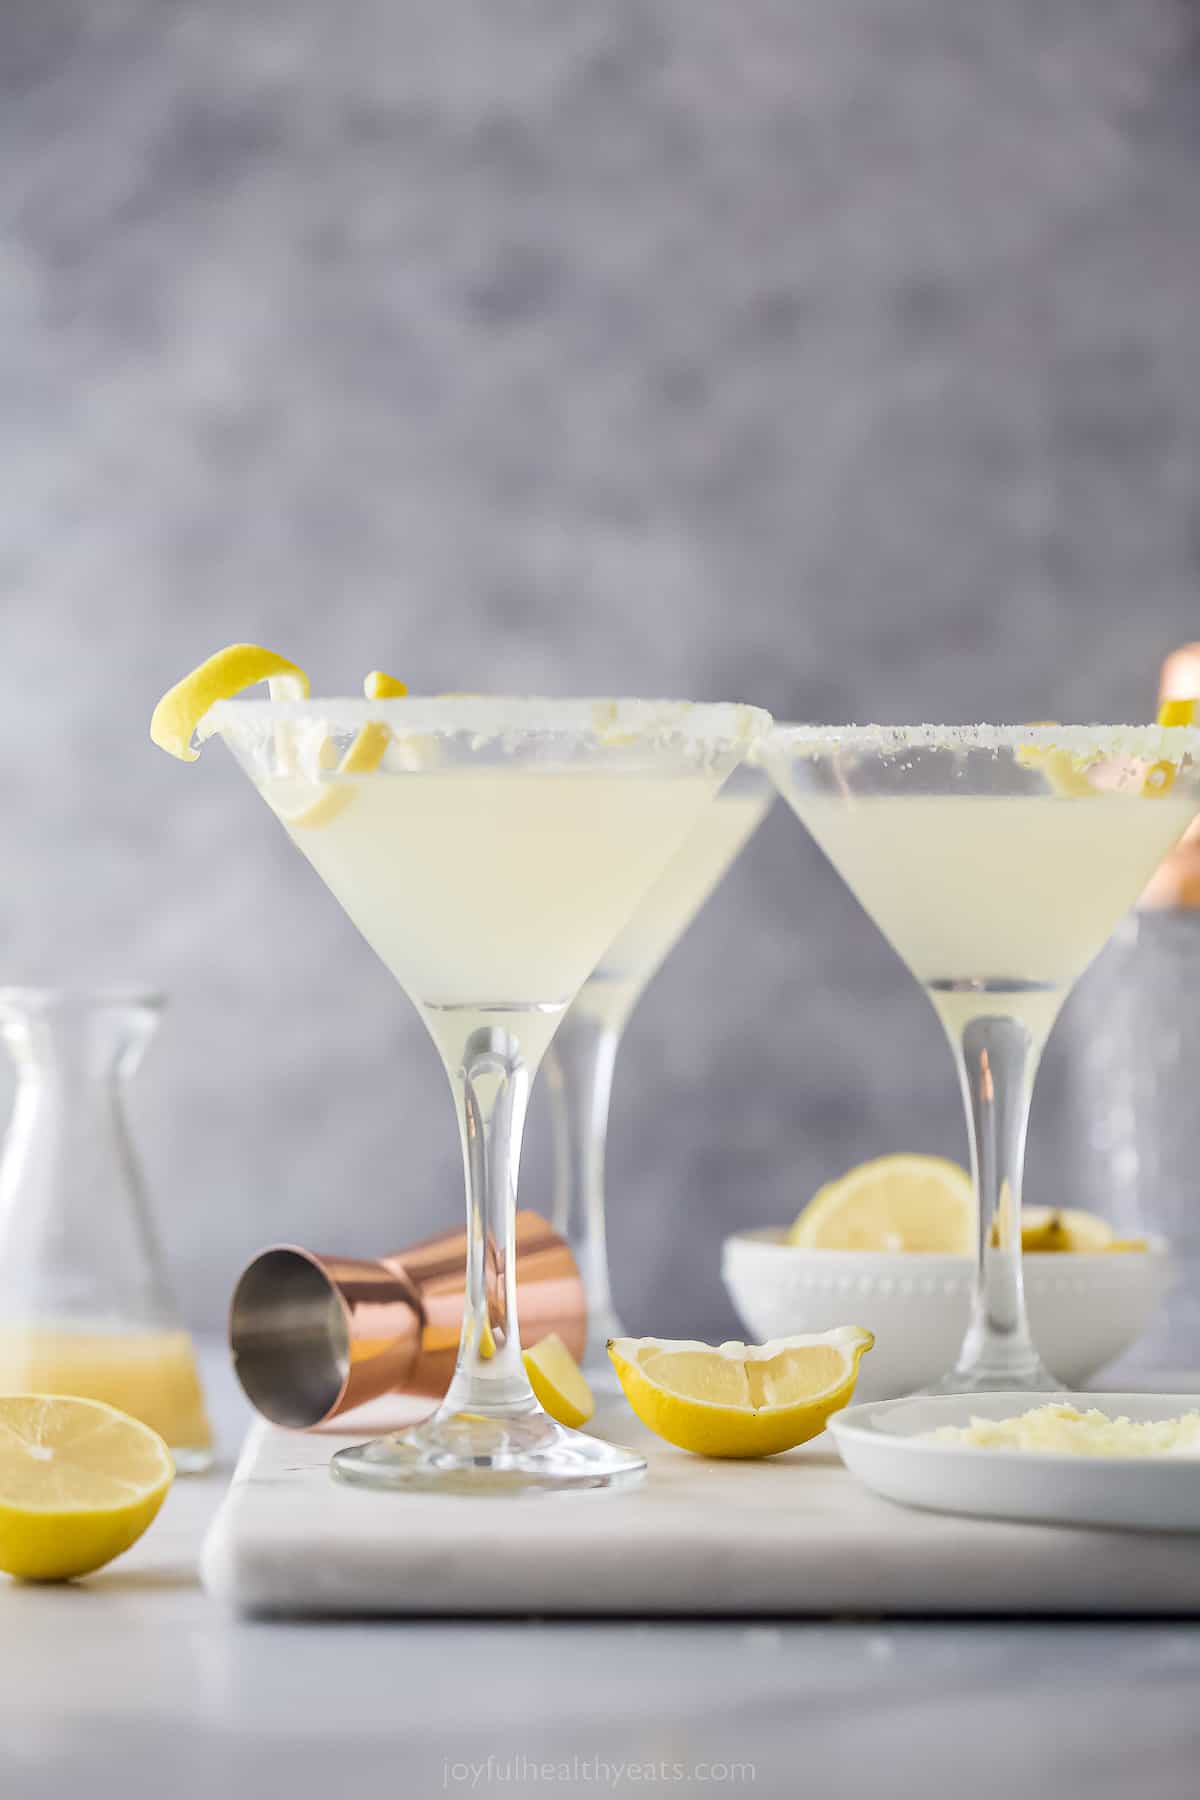 three martini glasses with a pale yellow cocktail